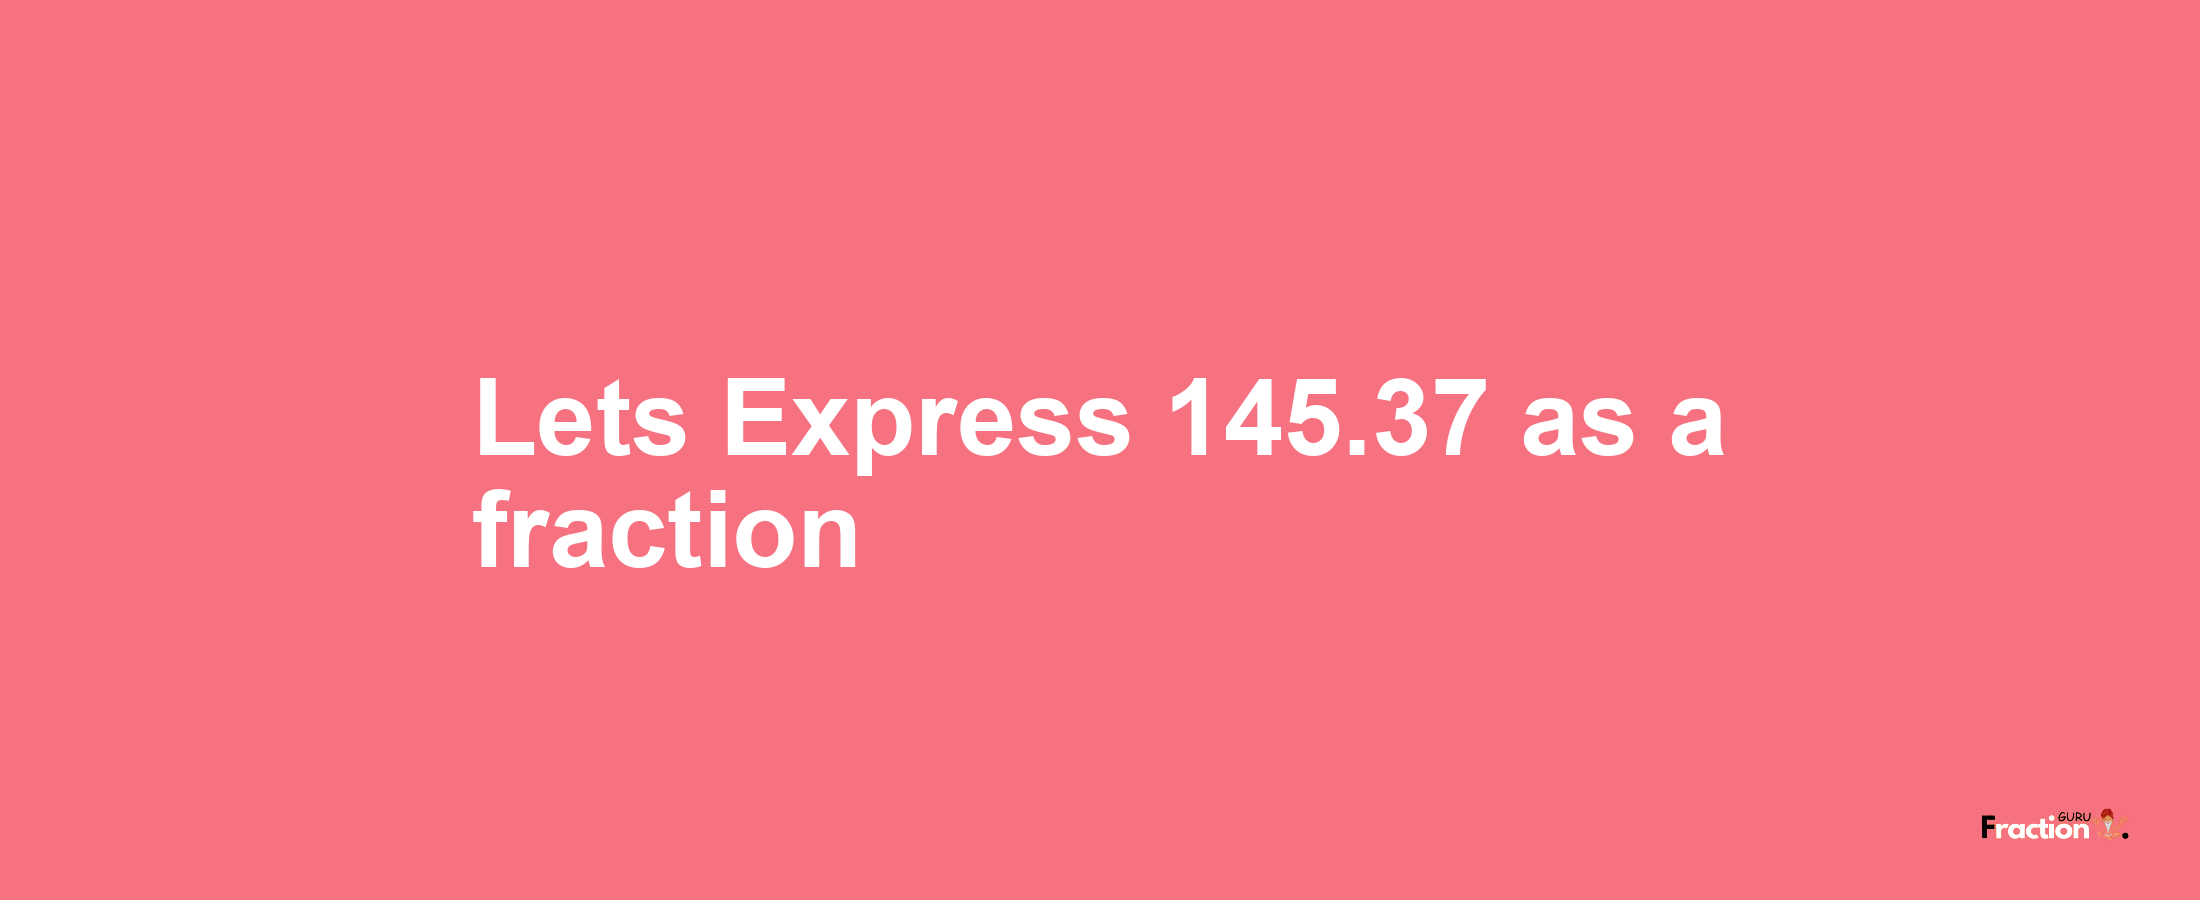 Lets Express 145.37 as afraction